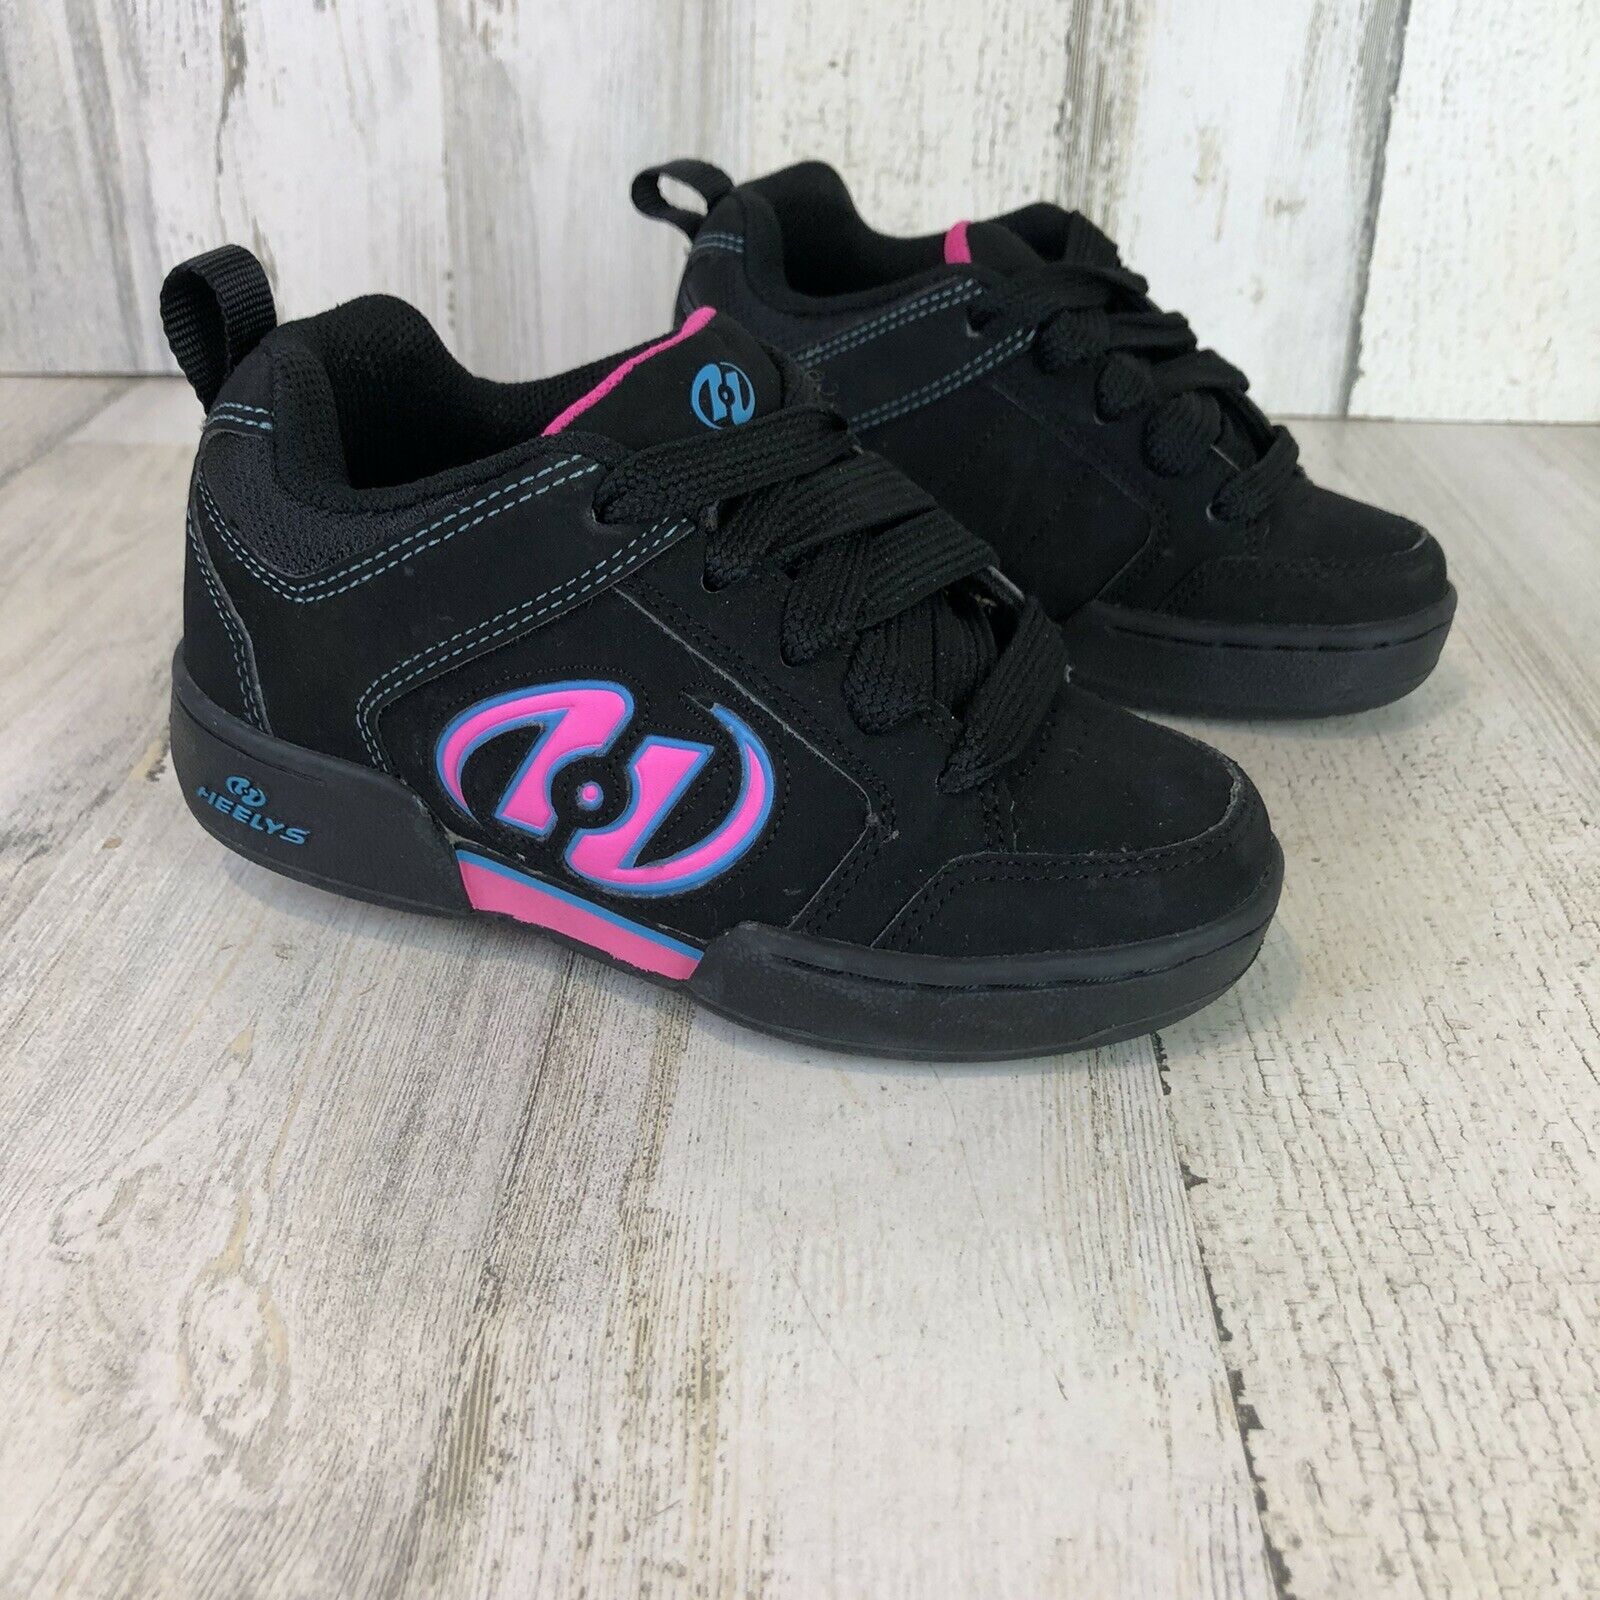 New Heelys Youth Size 12C Skate Shoes With Wheels Black Blue & Pink -7401c